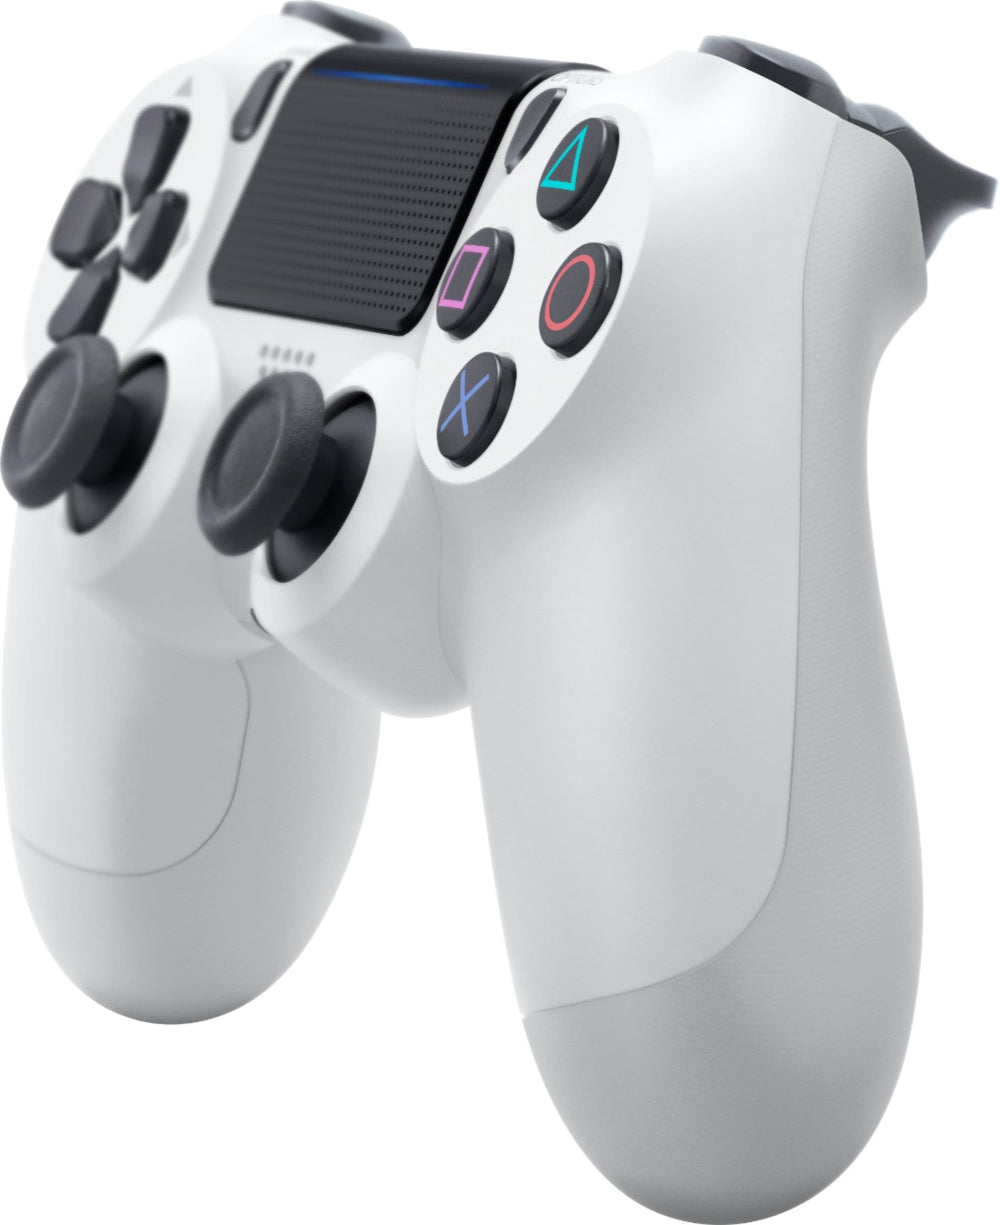 DualShock 4 Wireless Controller for Sony PlayStation 4 - Glacier White_1